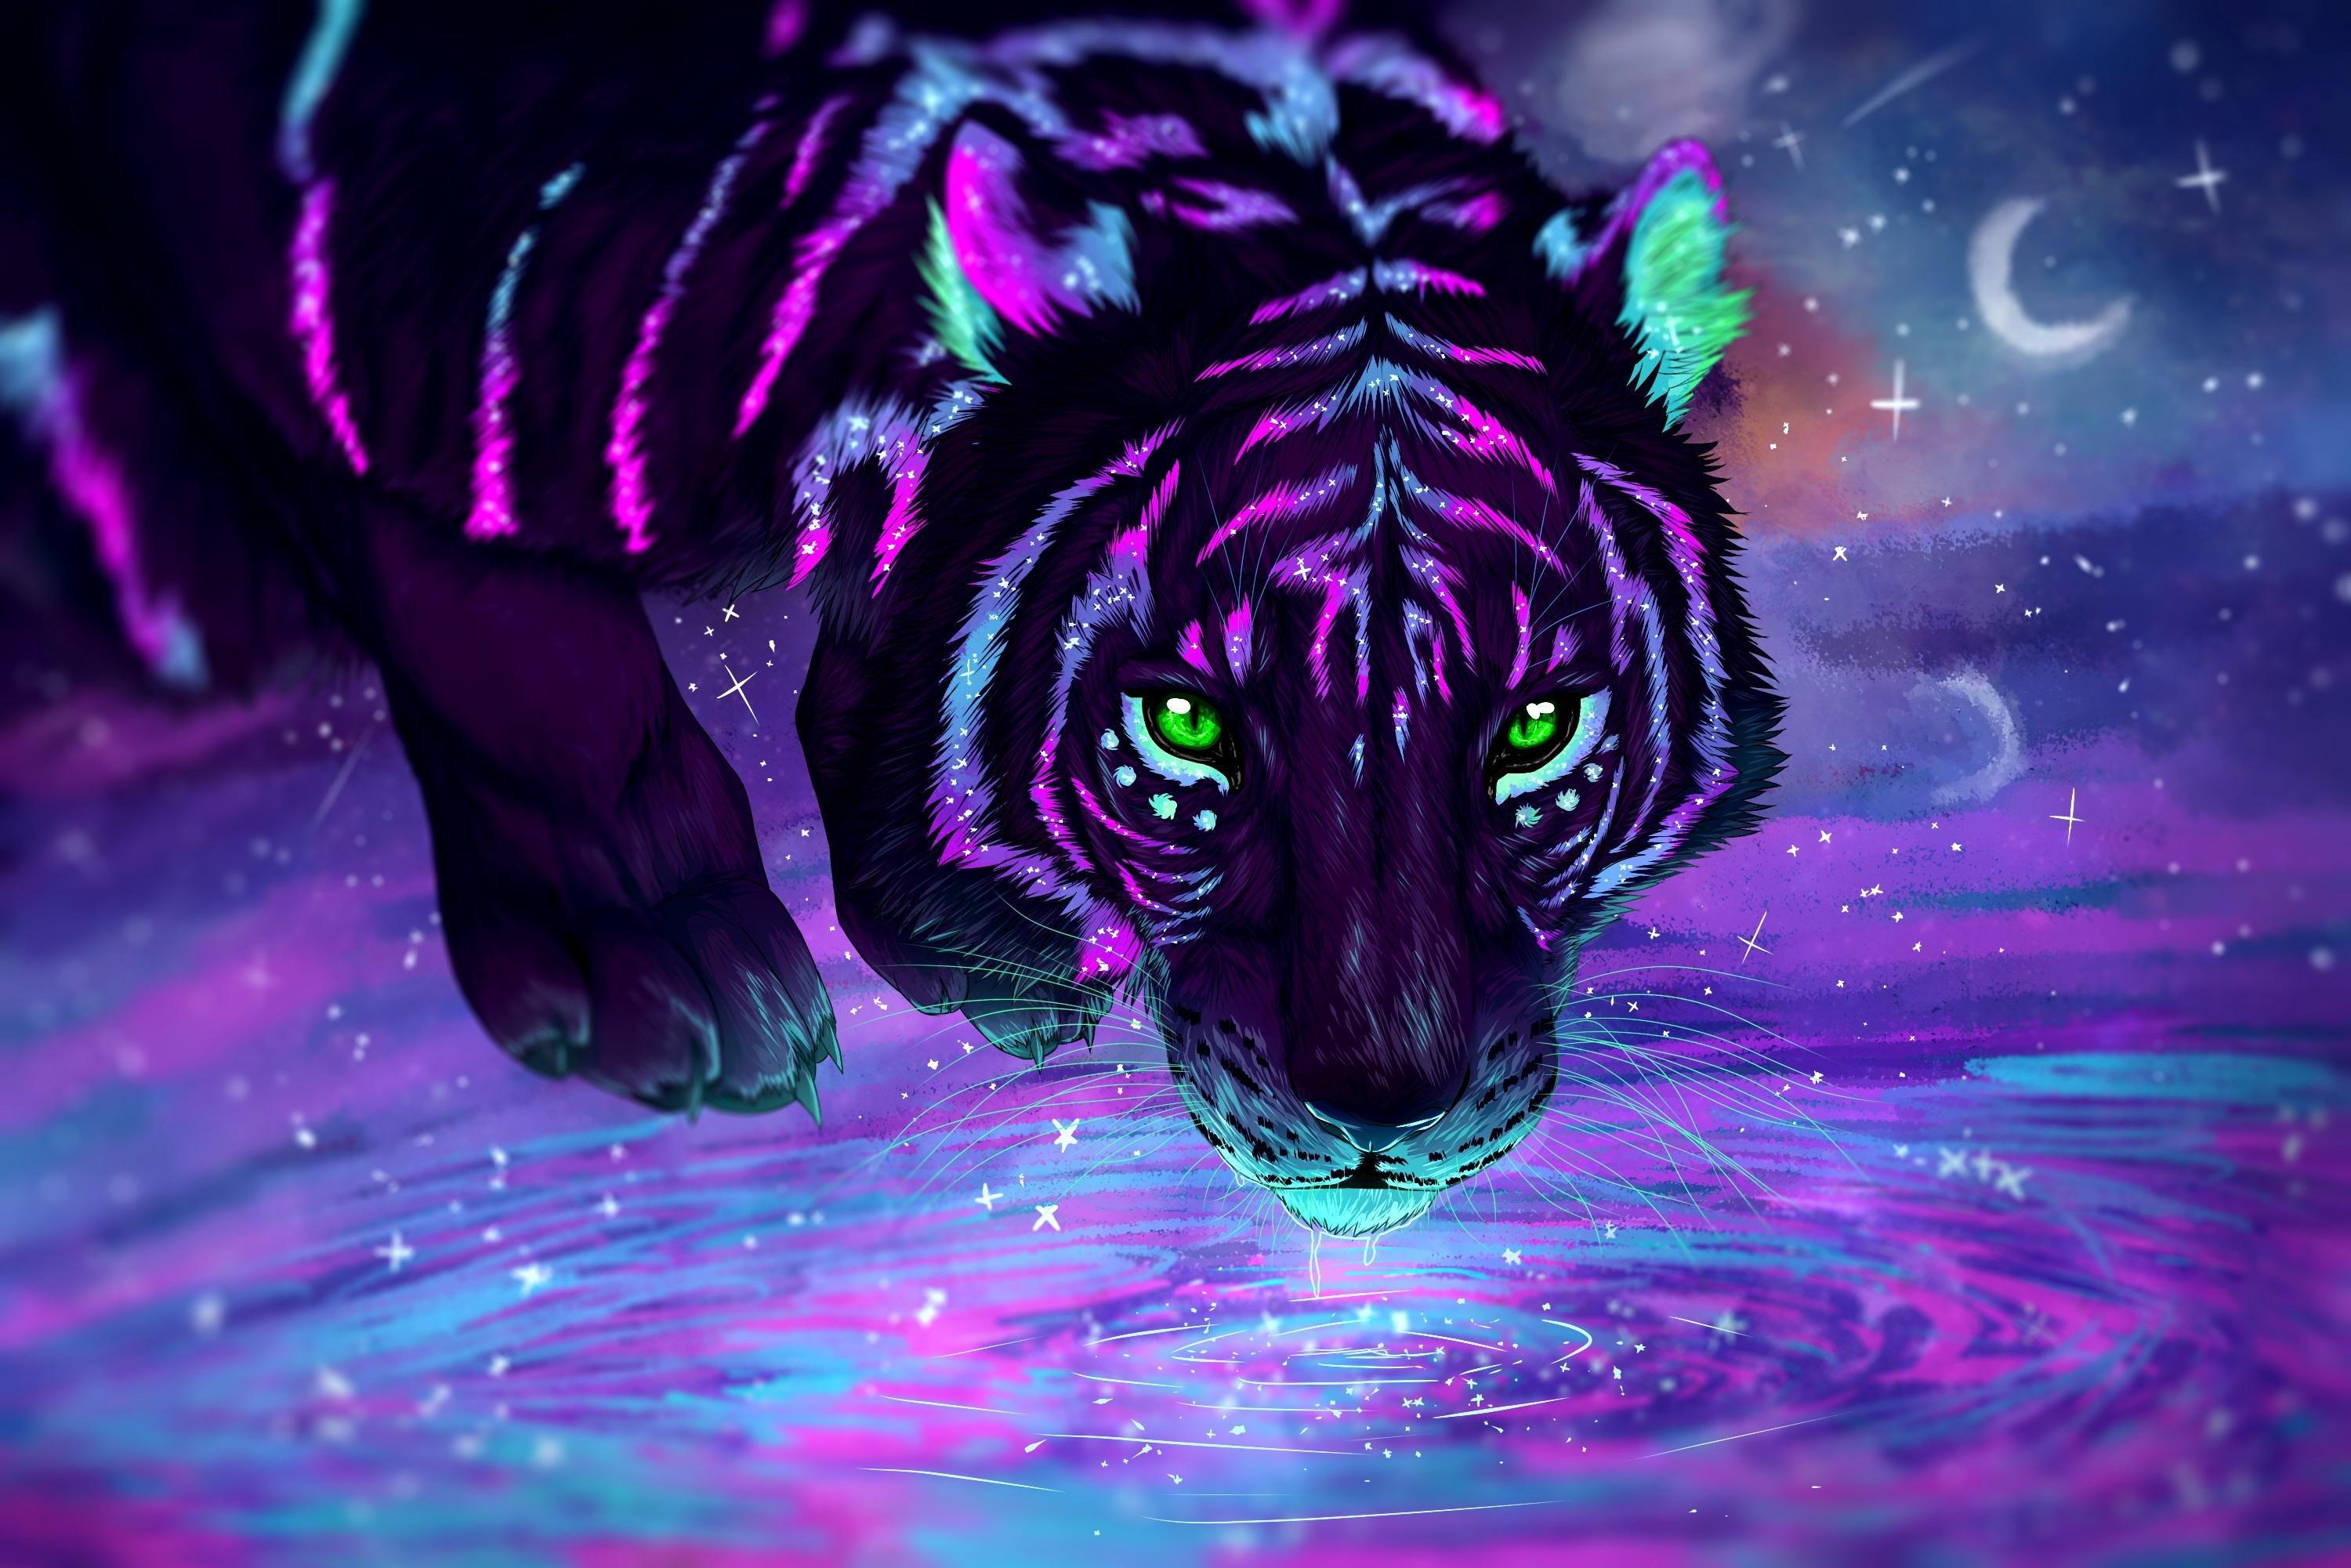 tiger 4K wallpaper for your desktop or mobile screen free and easy